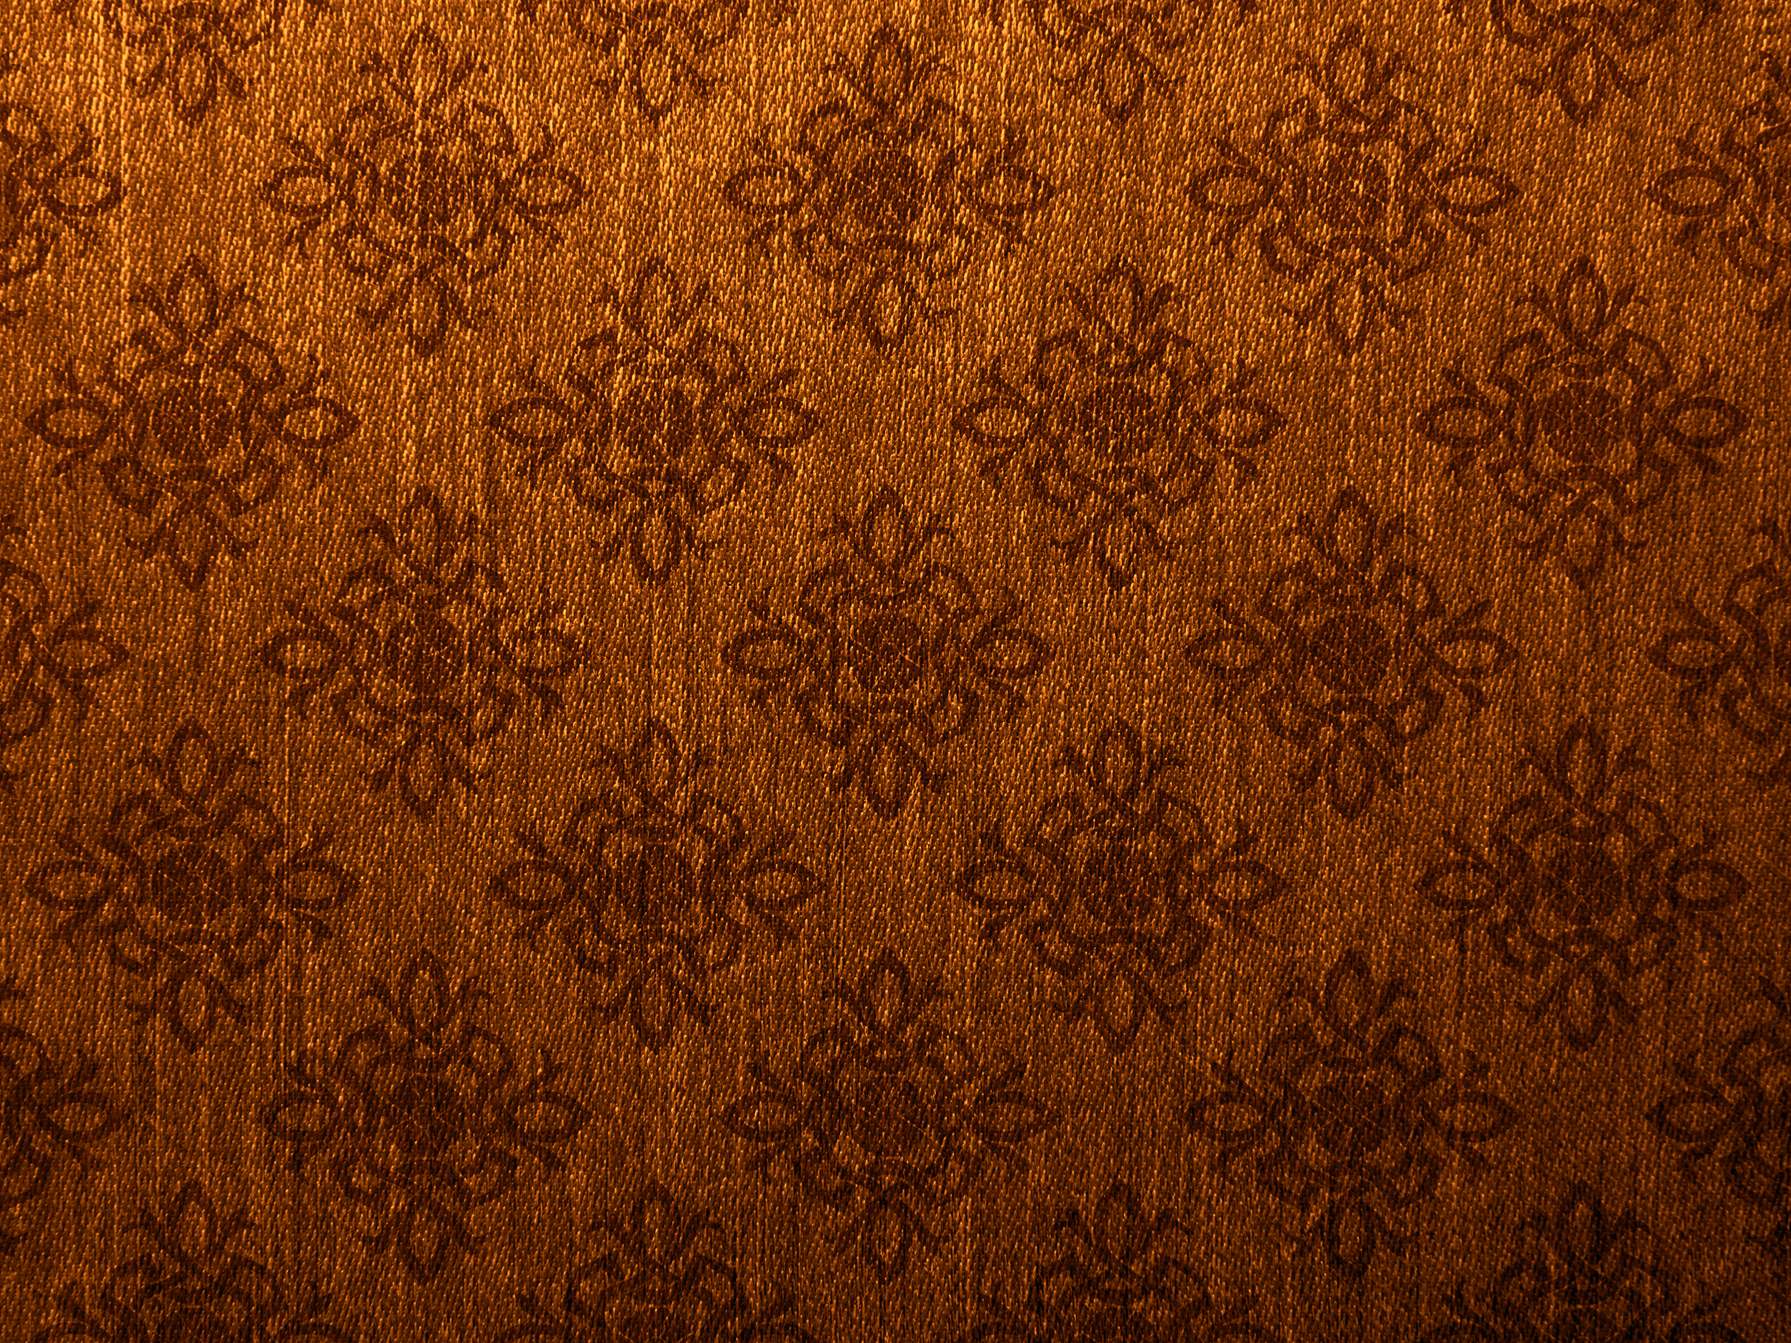 Buy Brown Color With Self Texture Base Damask Design Wallpaper By Konark  Decor Online  Pattern  Textures Wallpapers  Wallpapers  Furnishings   Pepperfry Product